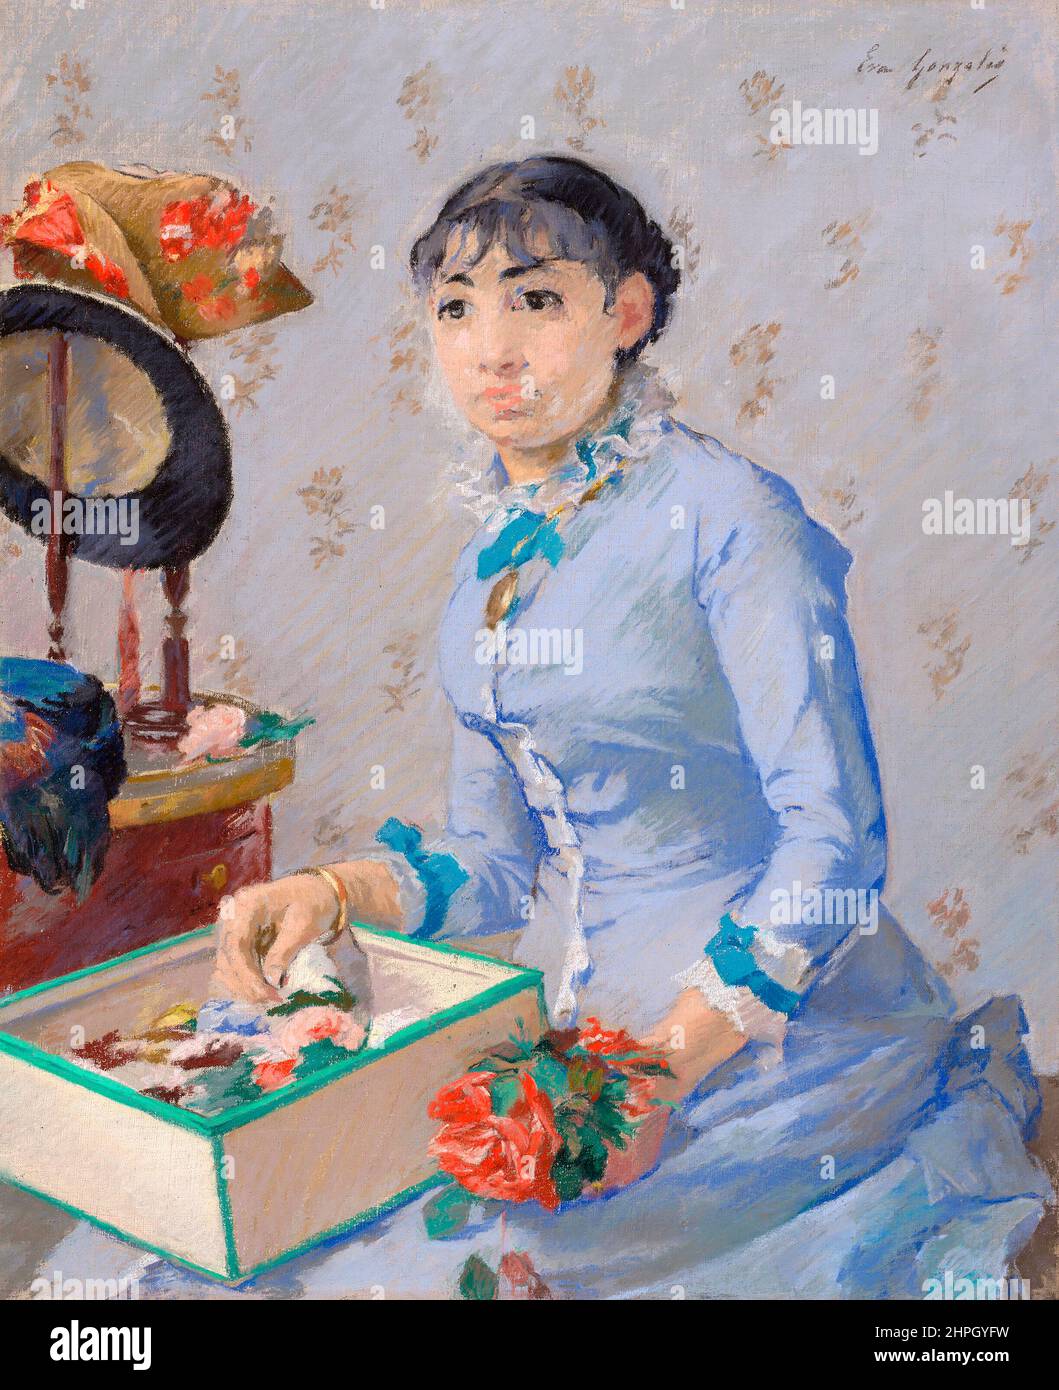 The Milliner by the French impressionist painter, Eva Gonzalès (1849-1883), pastel on canvas, c. 1877 Stock Photo